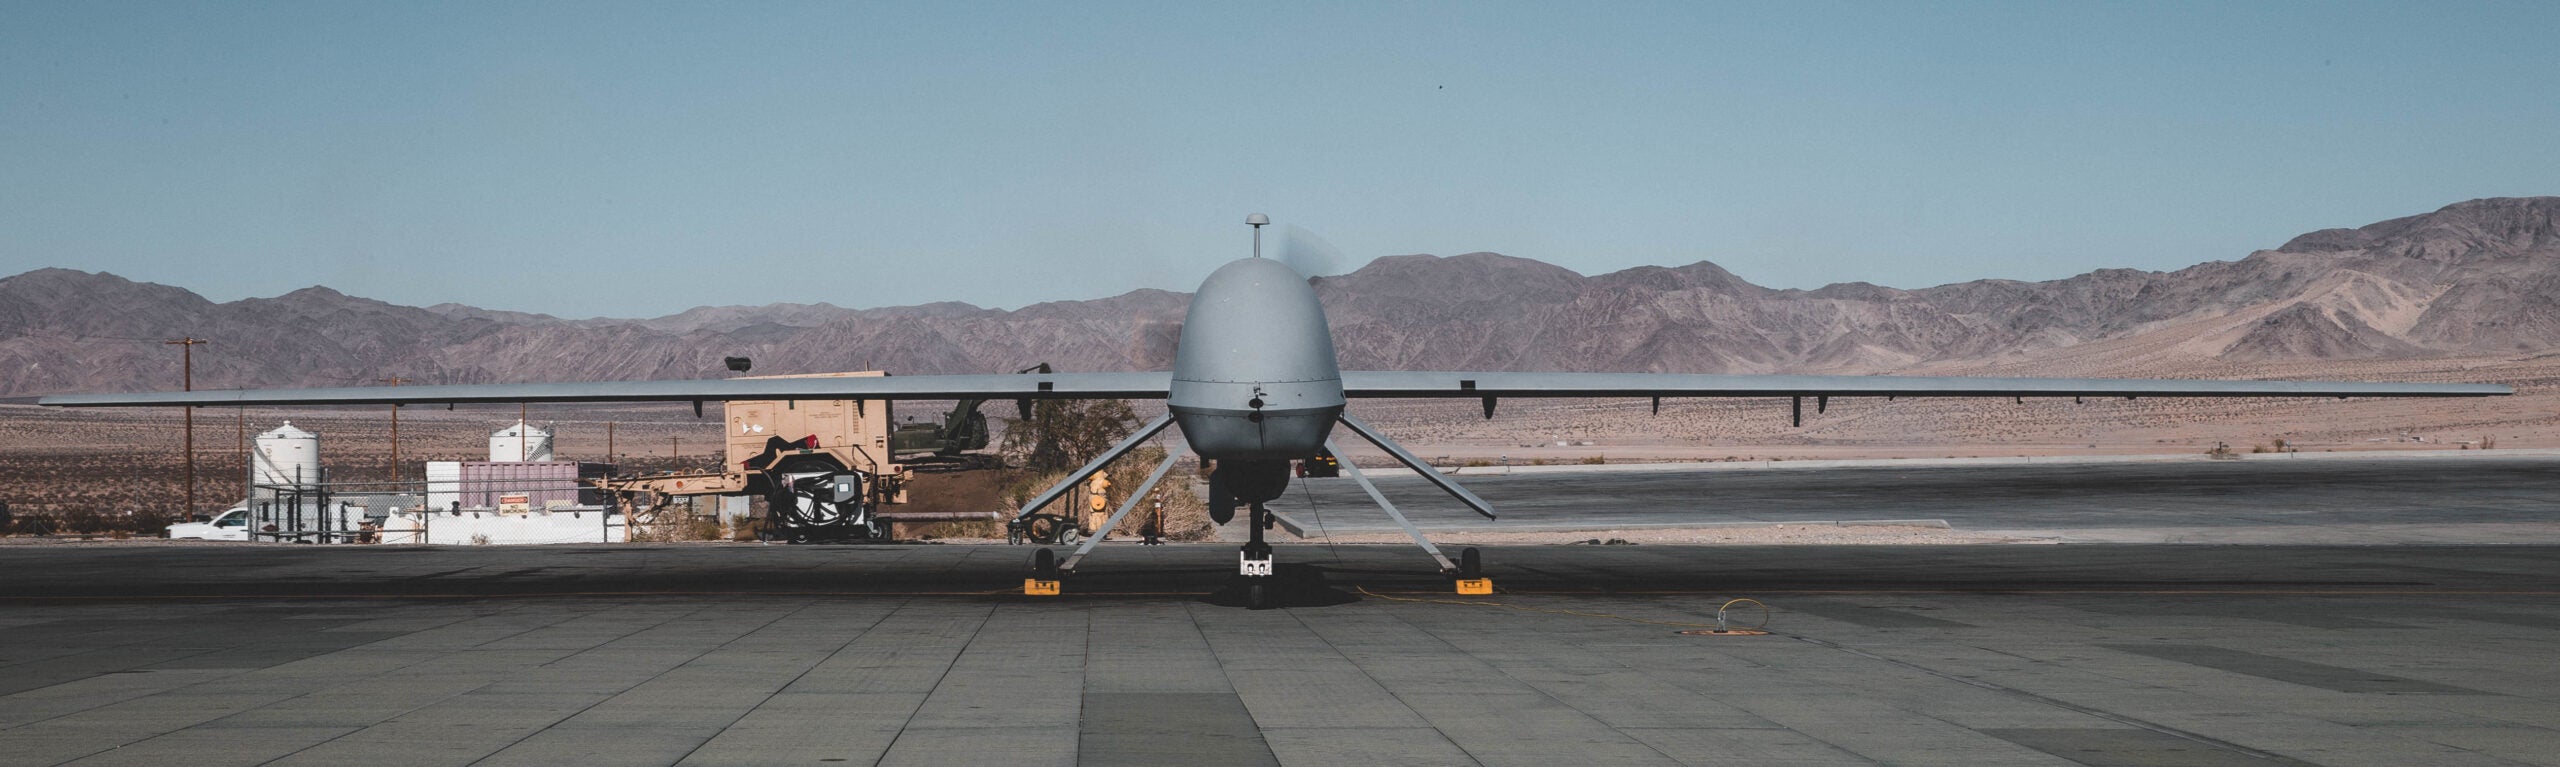 A U.S. Army MQ-1C Gray Eagle with B company, 229th Aviation Regiment known as "Flying Tigers" goes through preflight checks at the Air Combat Element landing strip, Marine Corps Air Ground Combat Center (MCAGCC), Twentynine Palms, Calif., Nov. 7, 2019. The Flying Tigers are supporting U.S. Army Special Operation Soldiers with 3rd Battalion, 3rd Special Forces Group (Airborne) with intelligence, surveillance, target acquisition, and reconnaissance during their tactical recovery of aircraft personnel training. (U.S. Marine Corps photo by Cpl. William Chockey)